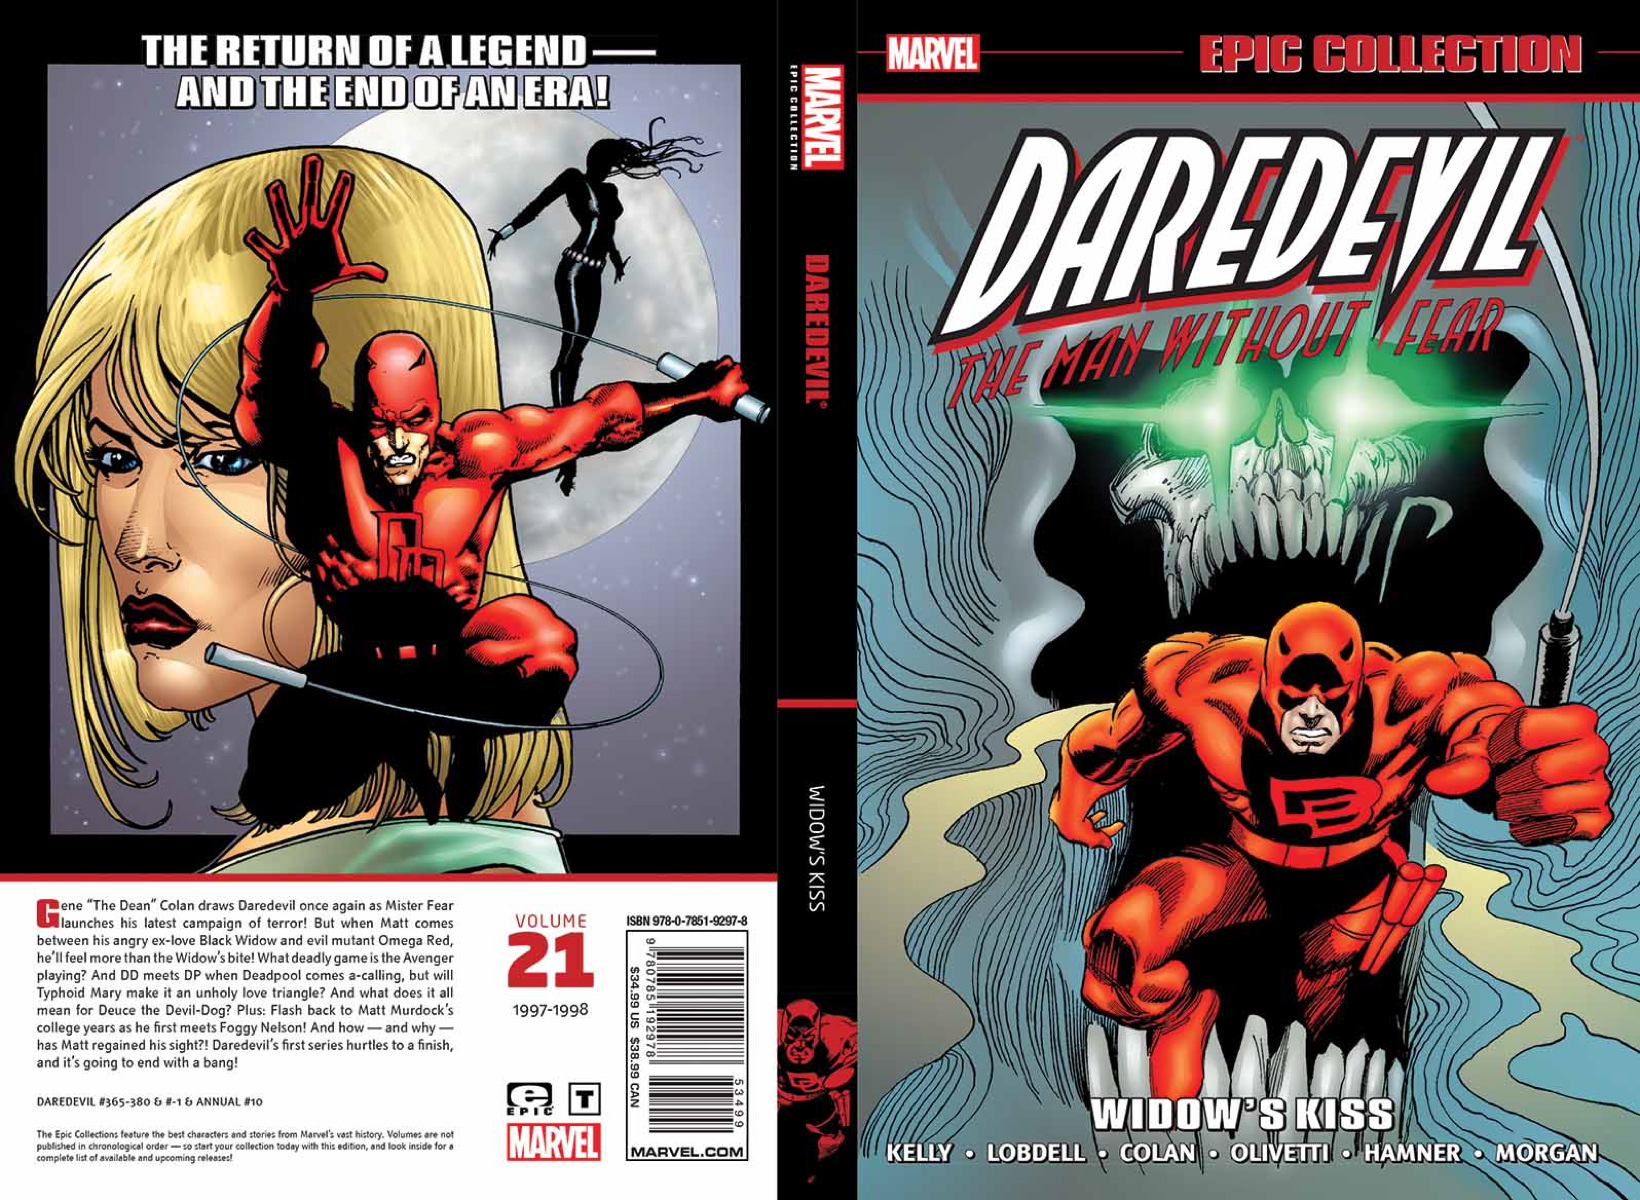 DAREDEVIL EPIC COLLECTION: WIDOW’S KISS TPB